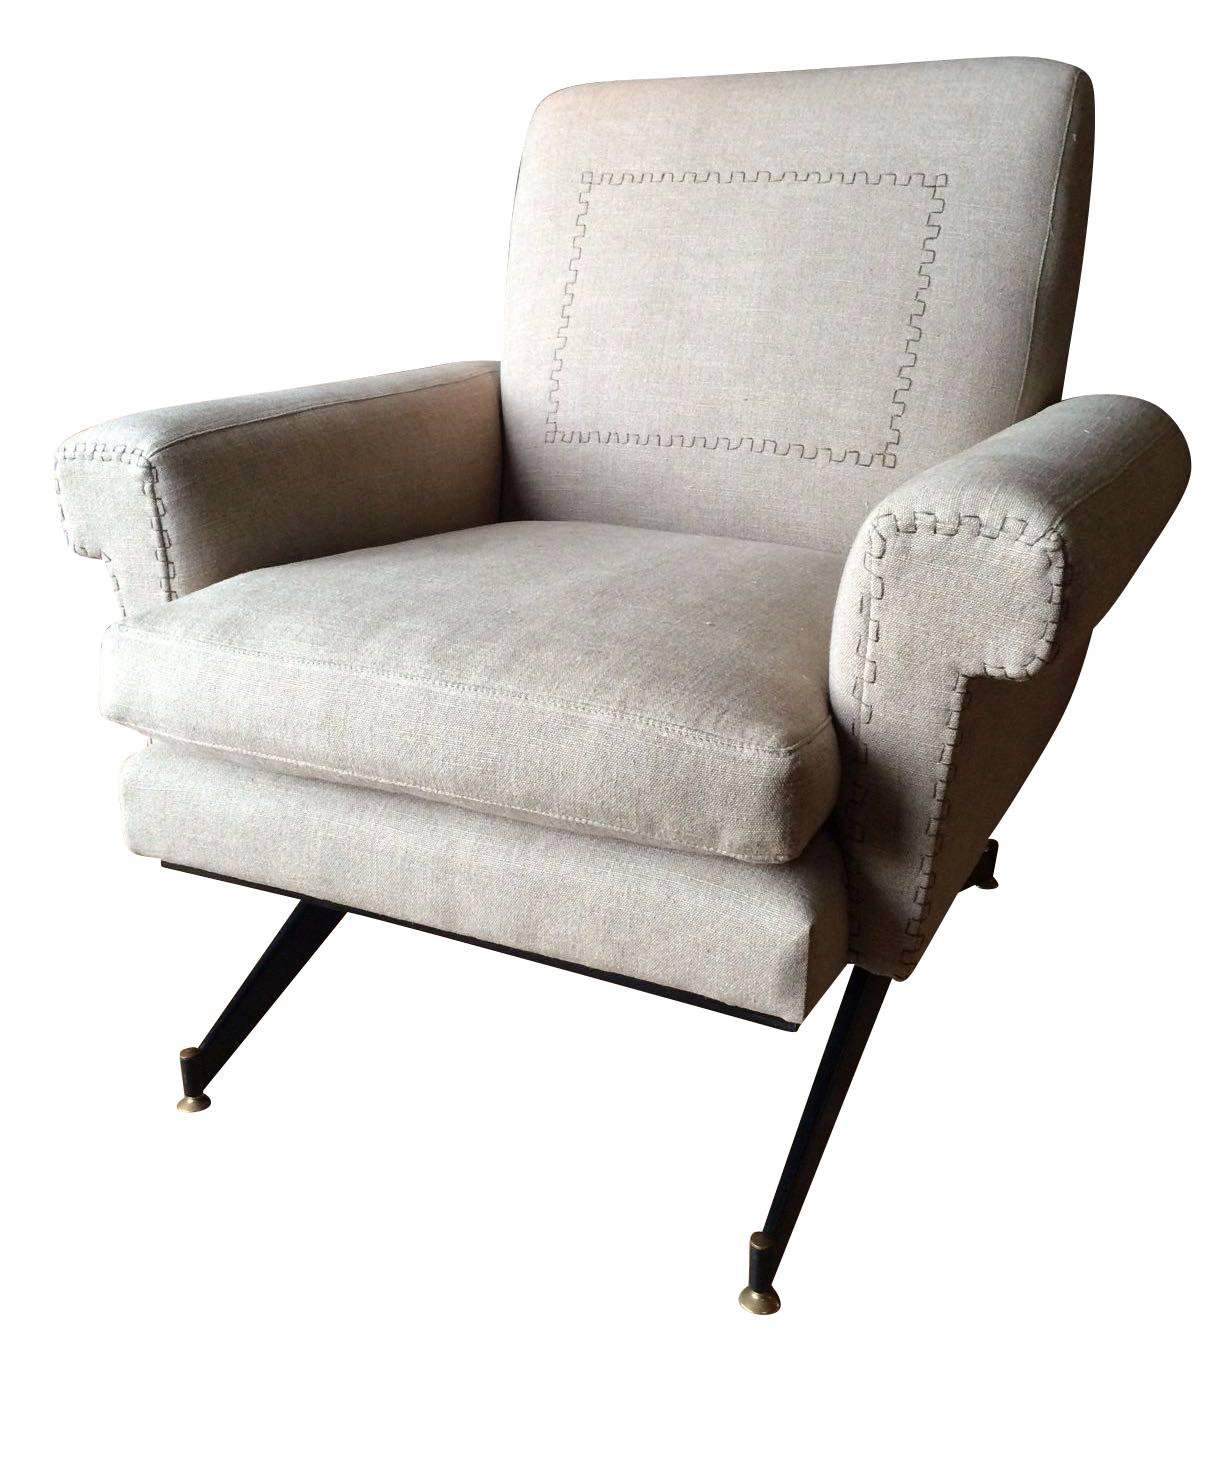 Mid-Century pair of recently reupholstered club chairs.
Neutral inen upholstery with decorative 